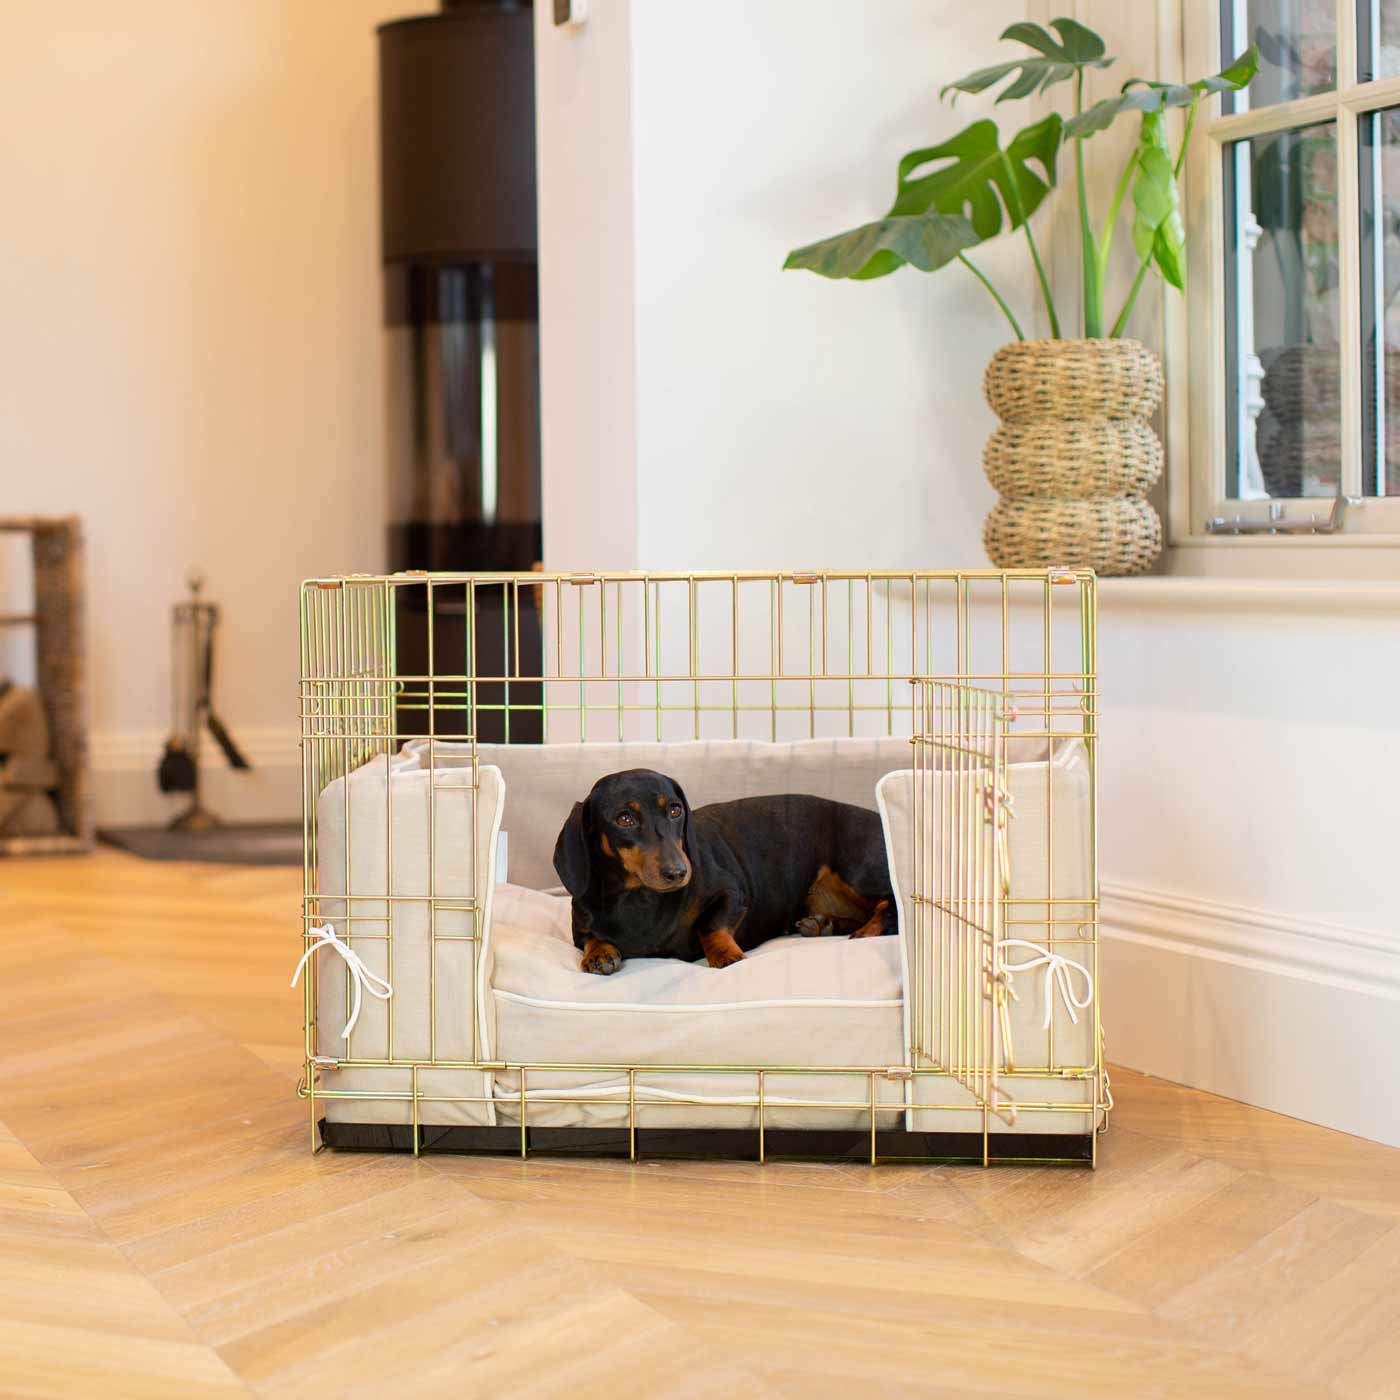 Discover Our Heavy-Duty Gold Dog Cage With Savanna Oatmeal Cushion & Bumper! The Perfect Cage Accessorize. Available To Personalize Here at Lords & Labradors US